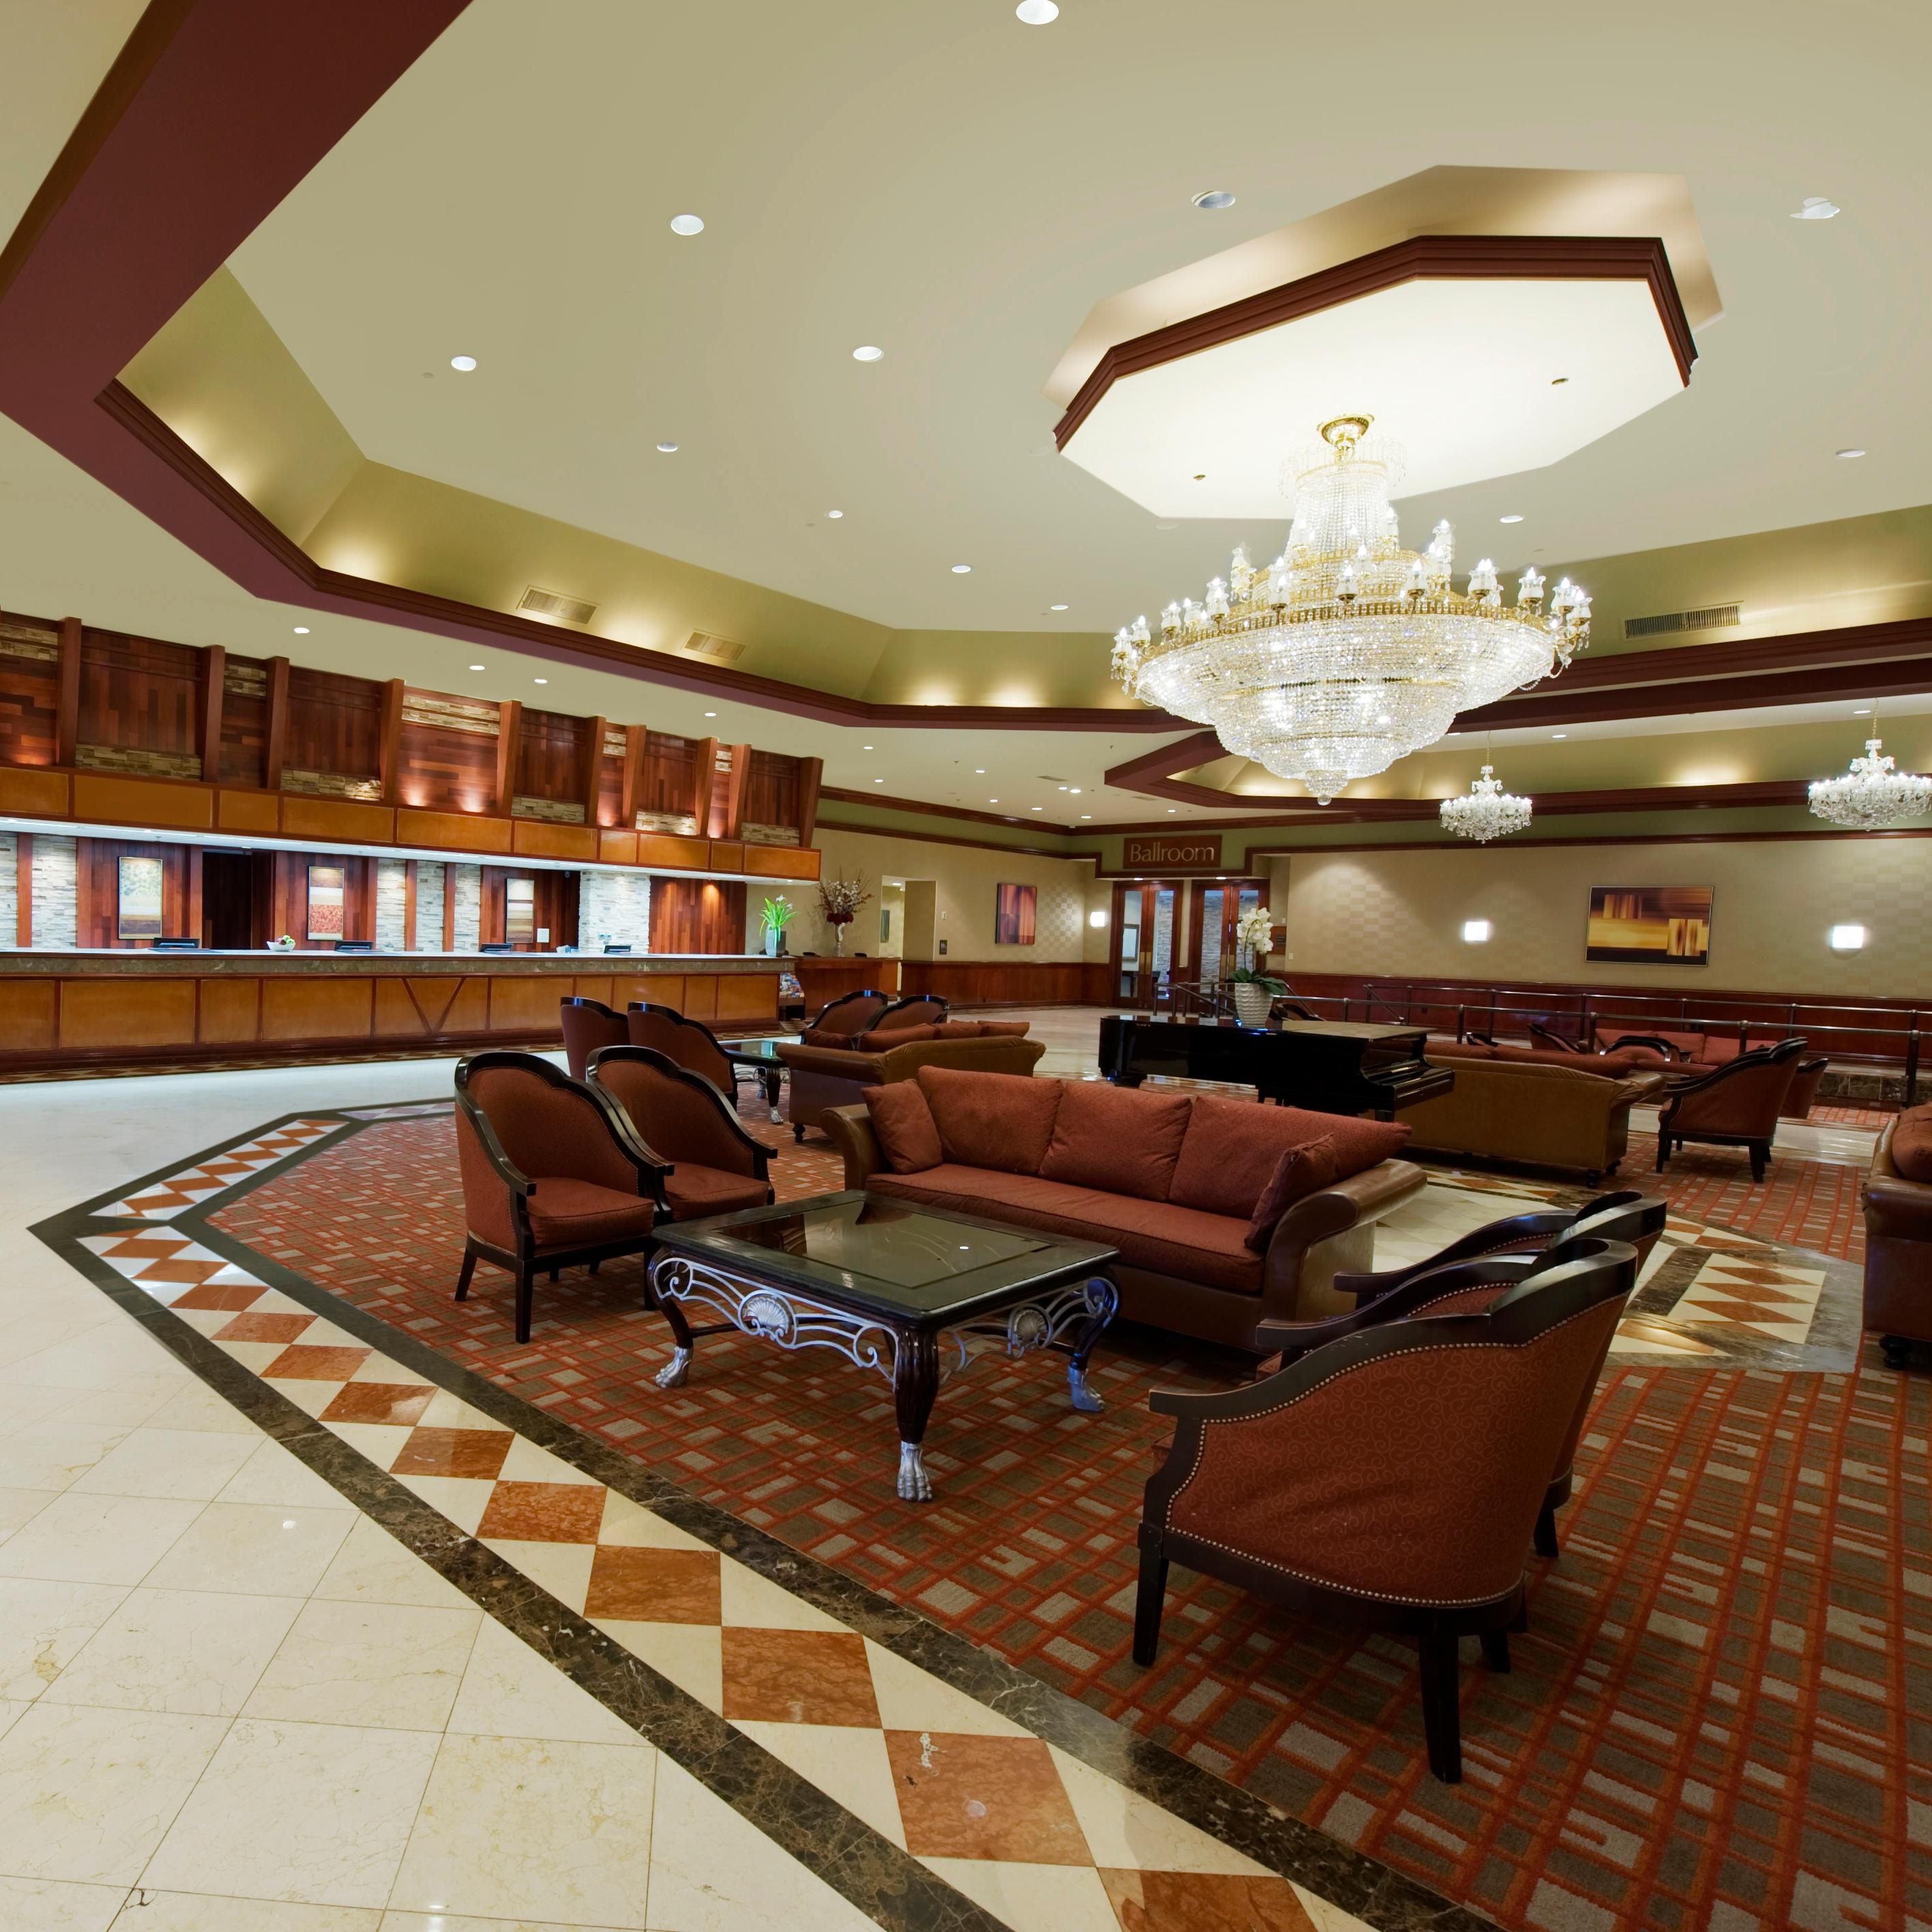 Large and welcoming hotel lobby